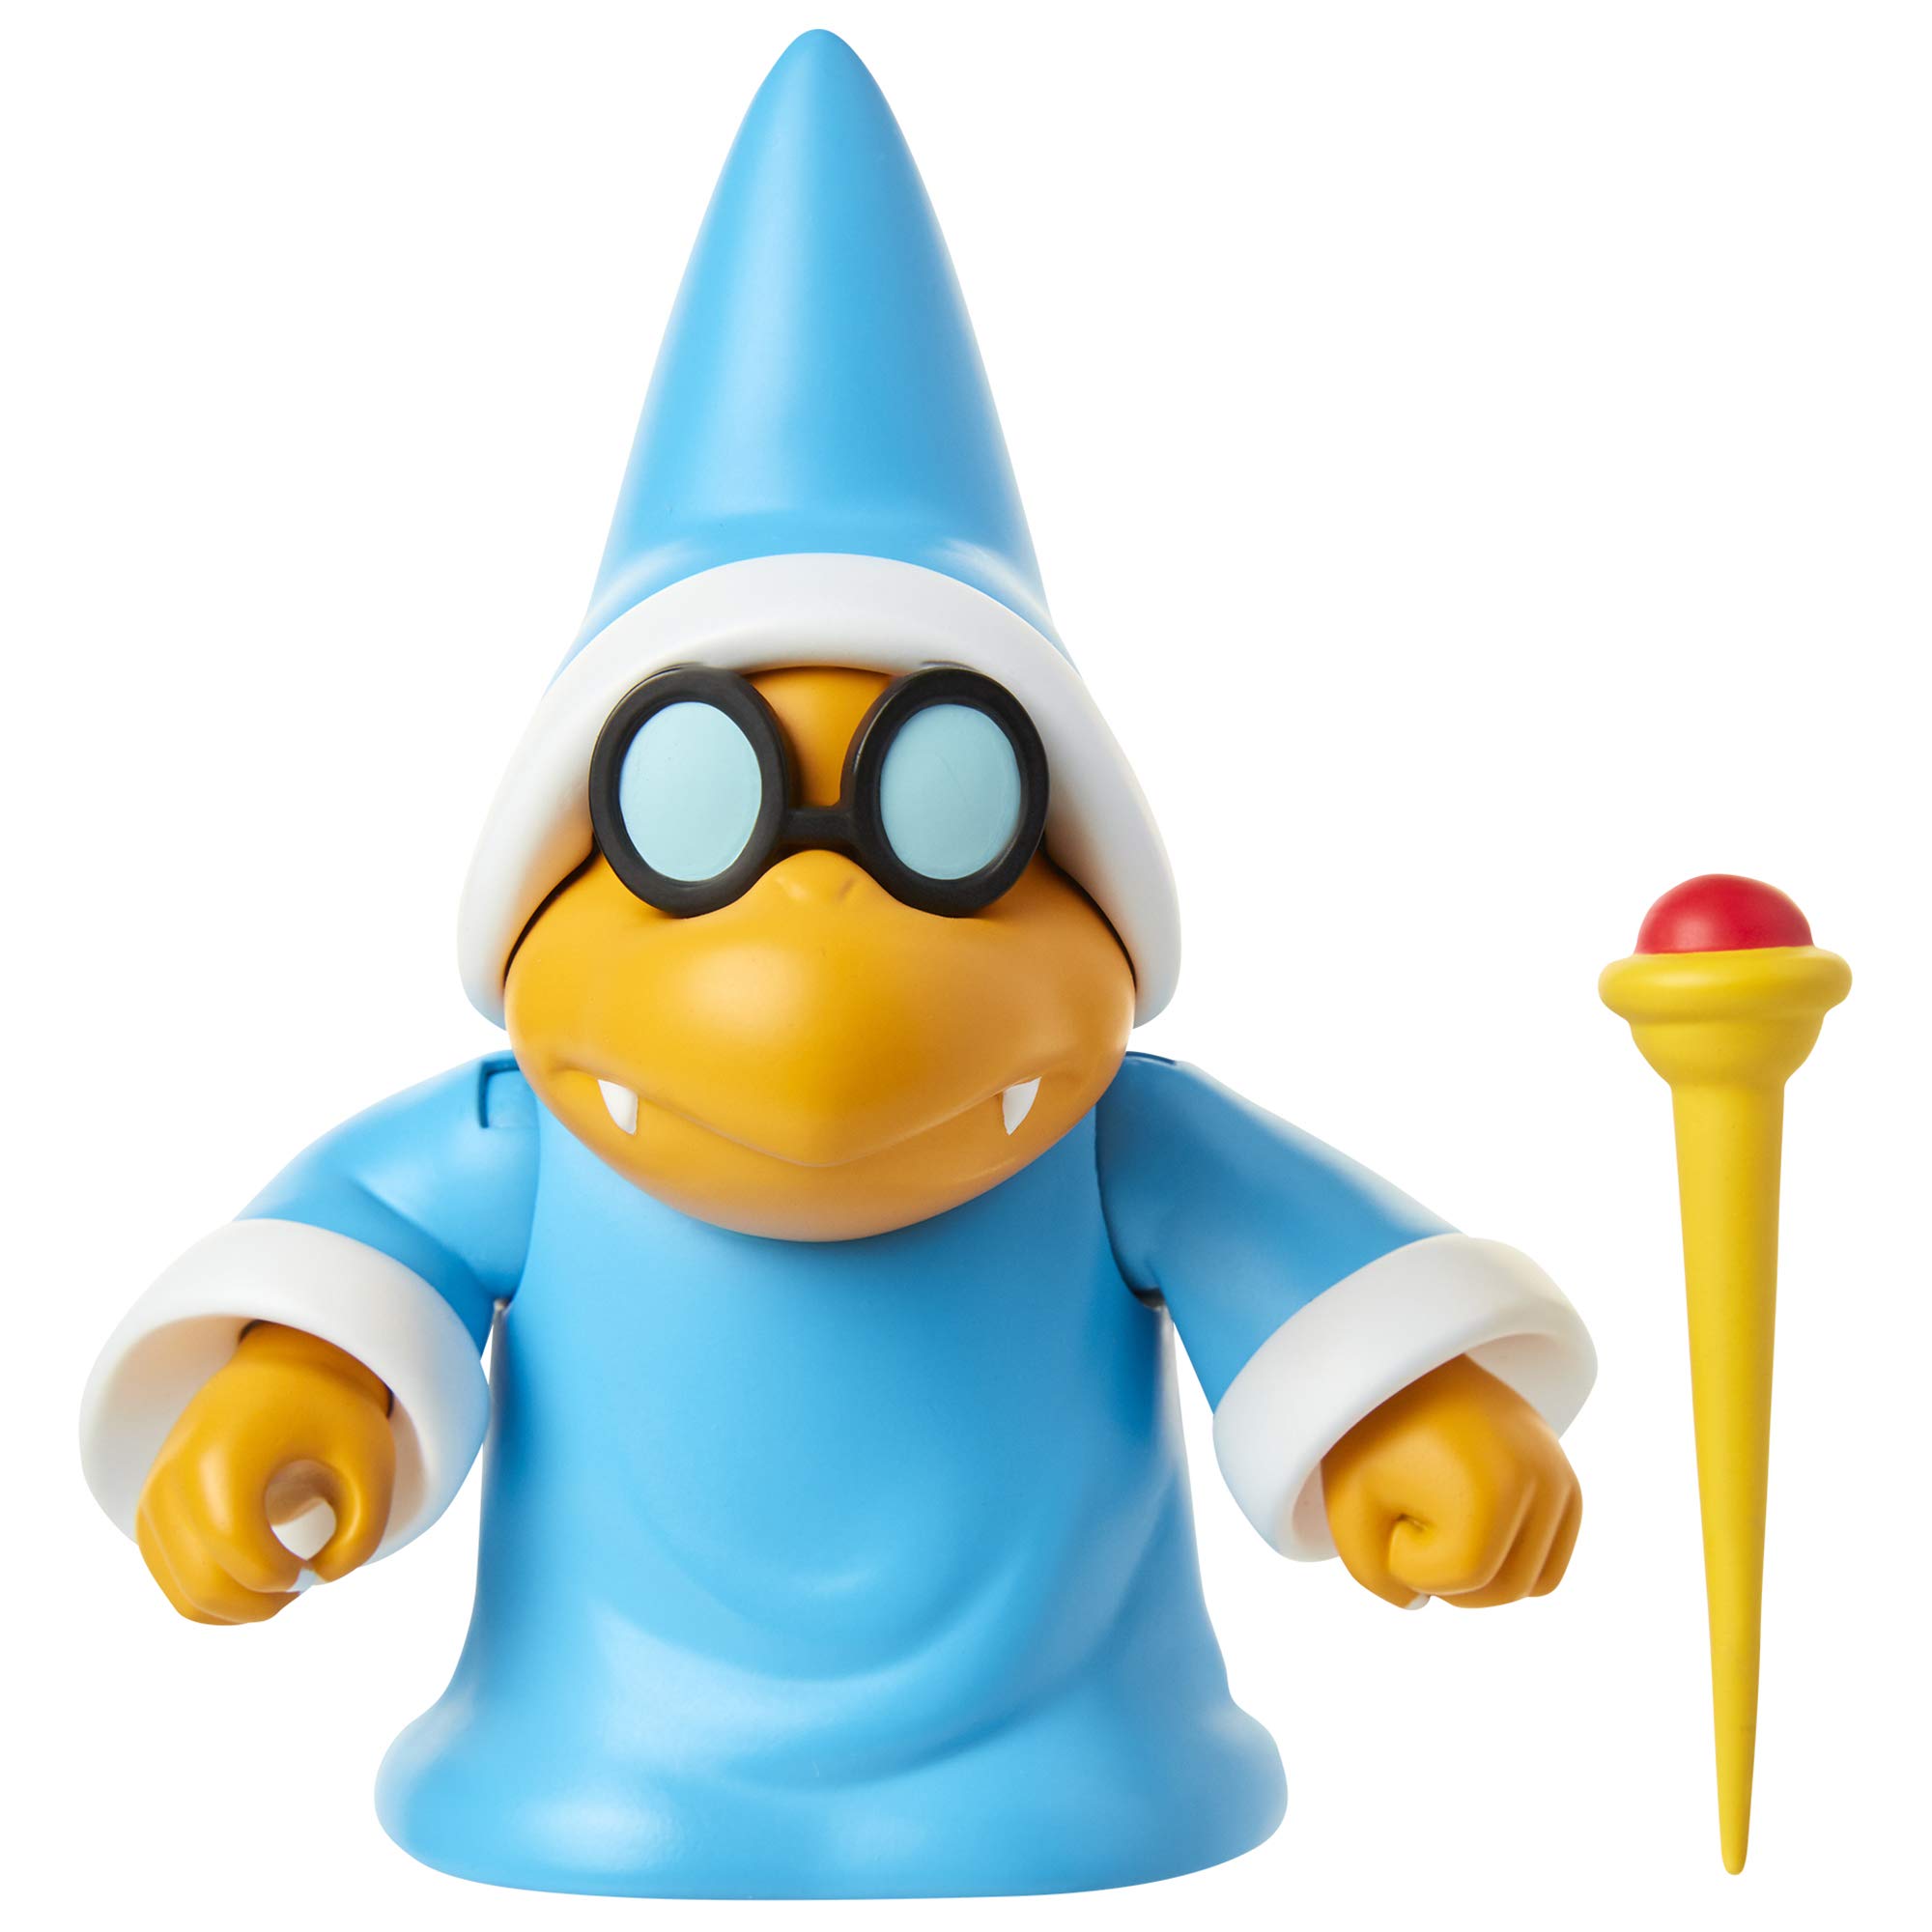 Super mario nintendo collectible magikoopa poseable articulated action figure with wand accessory perfect for kids collectors alike for ages toys games